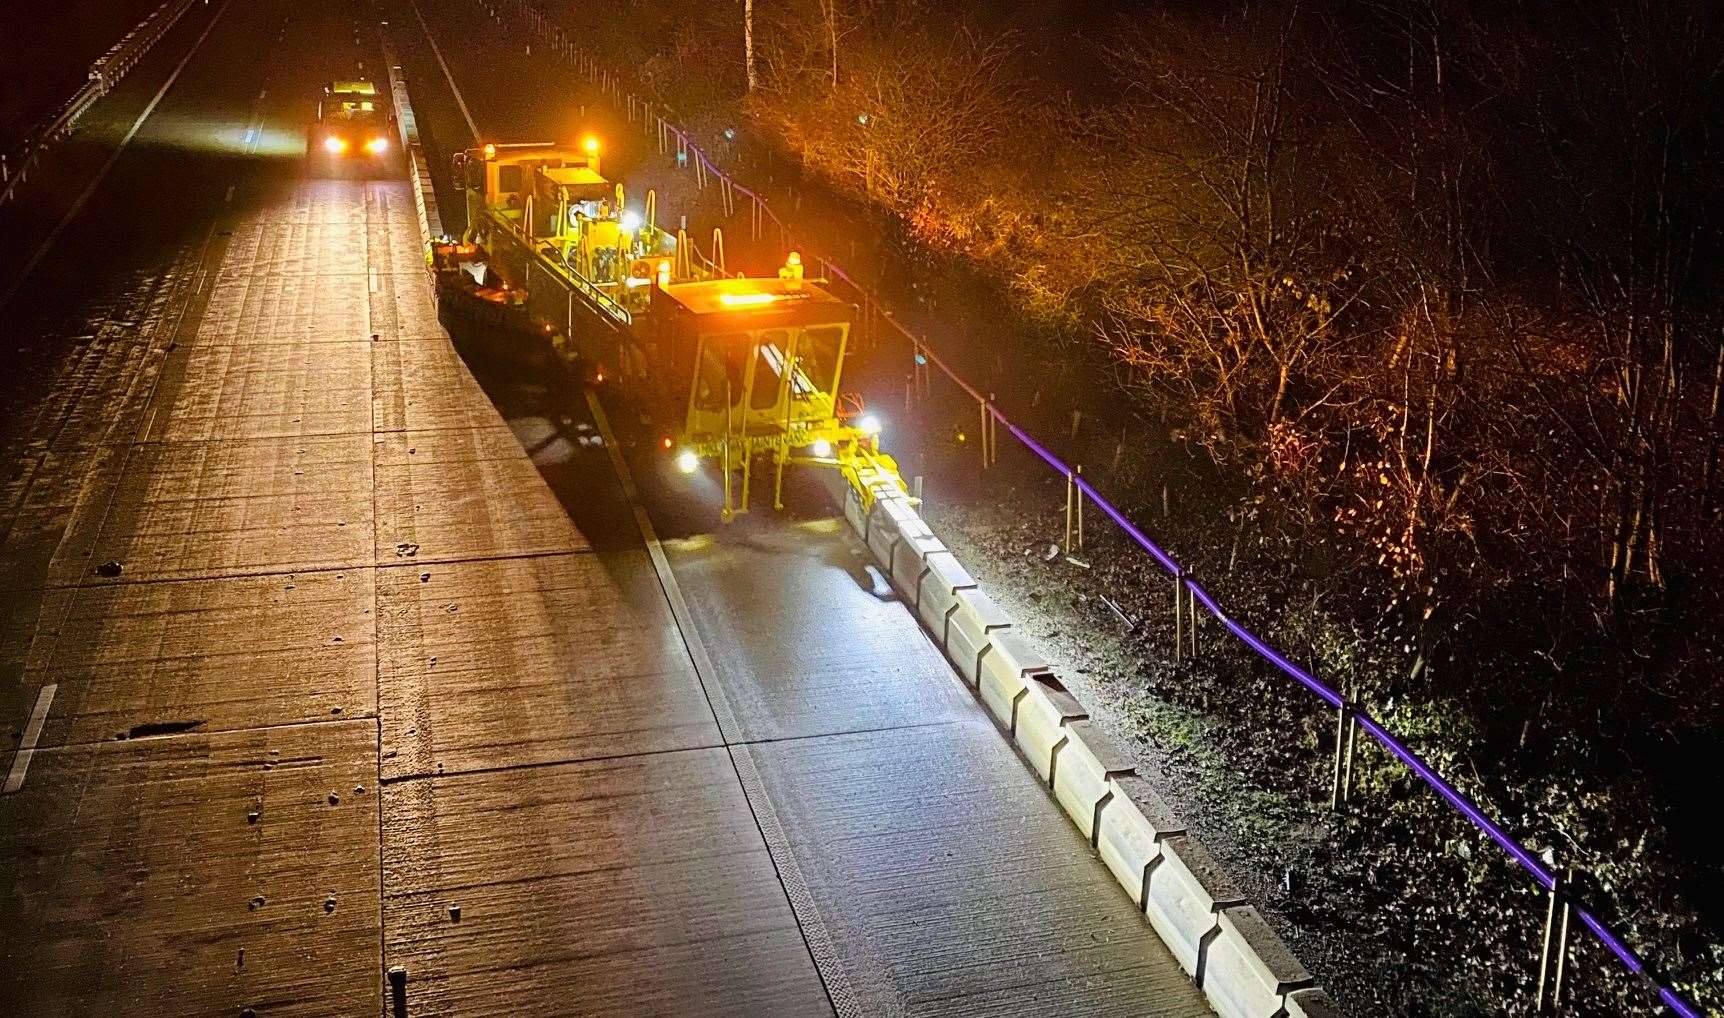 The concrete barrier usually stored on the hard shoulder will be moved to the central reservation next year. Picture: Barry Goodwin